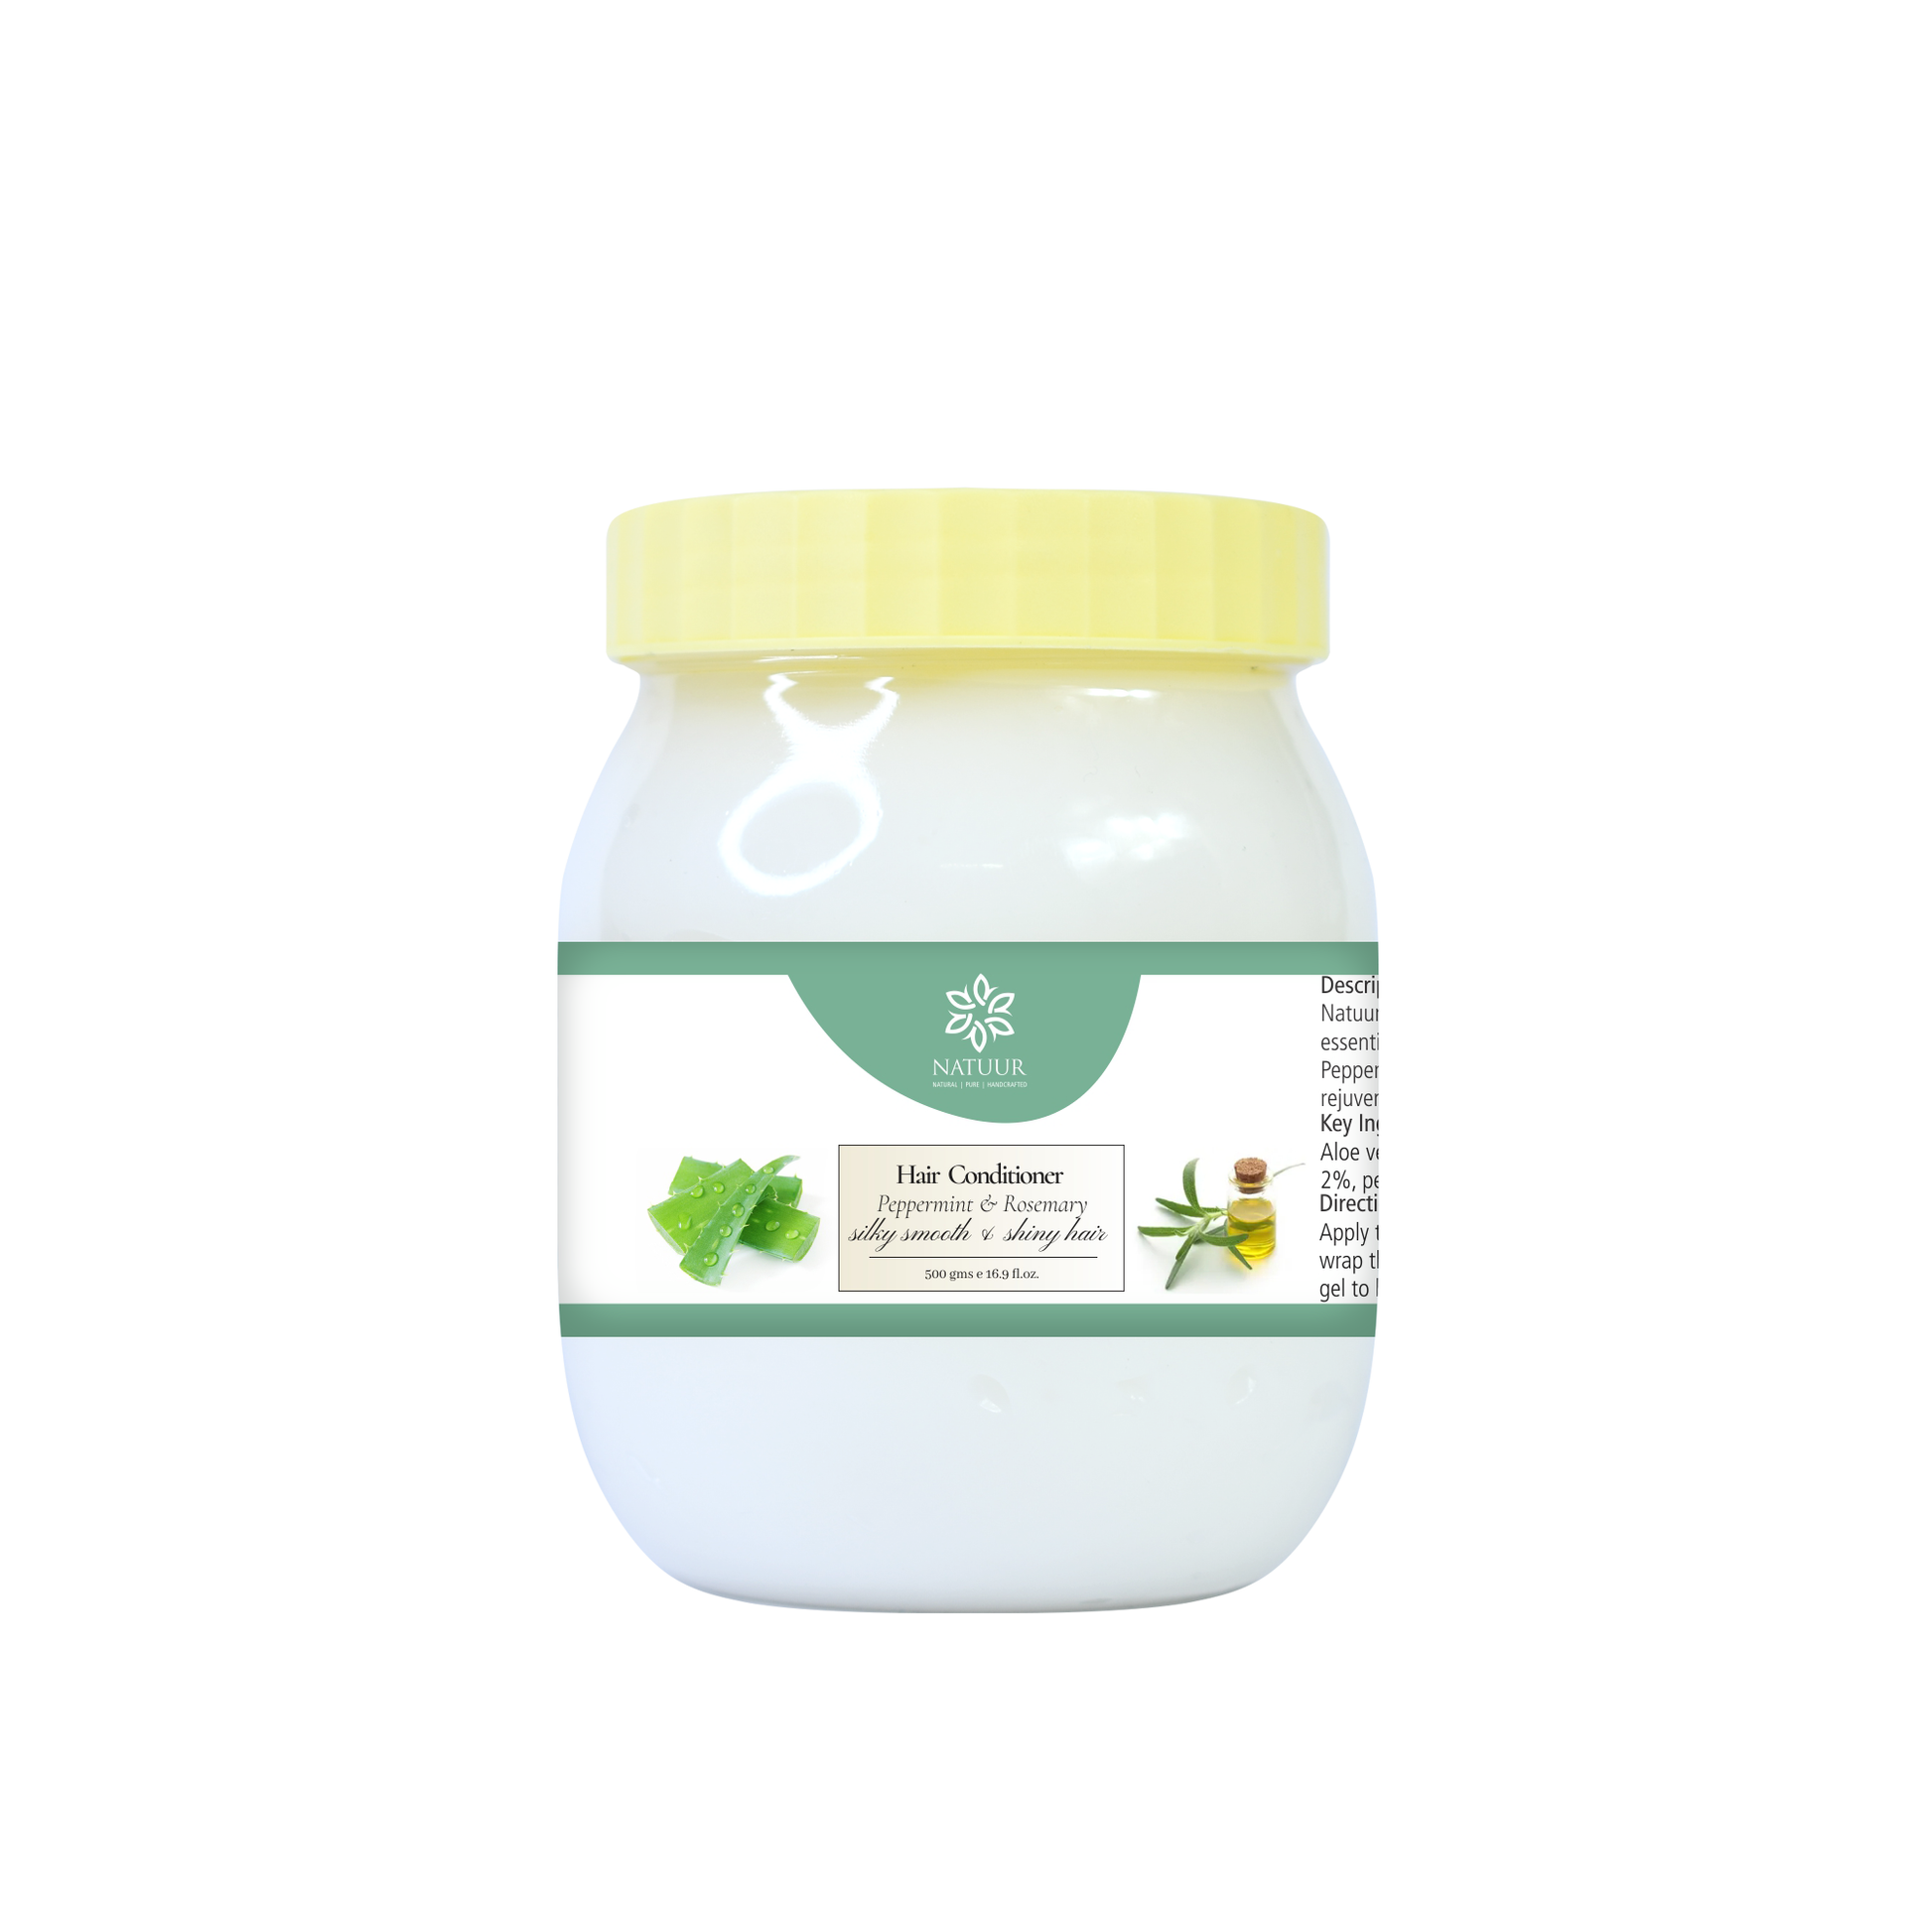 ALOE VERA HAIR CONDITIONER (Peppermint & Rosemary) silky smooth shiny hair - Natuur.in